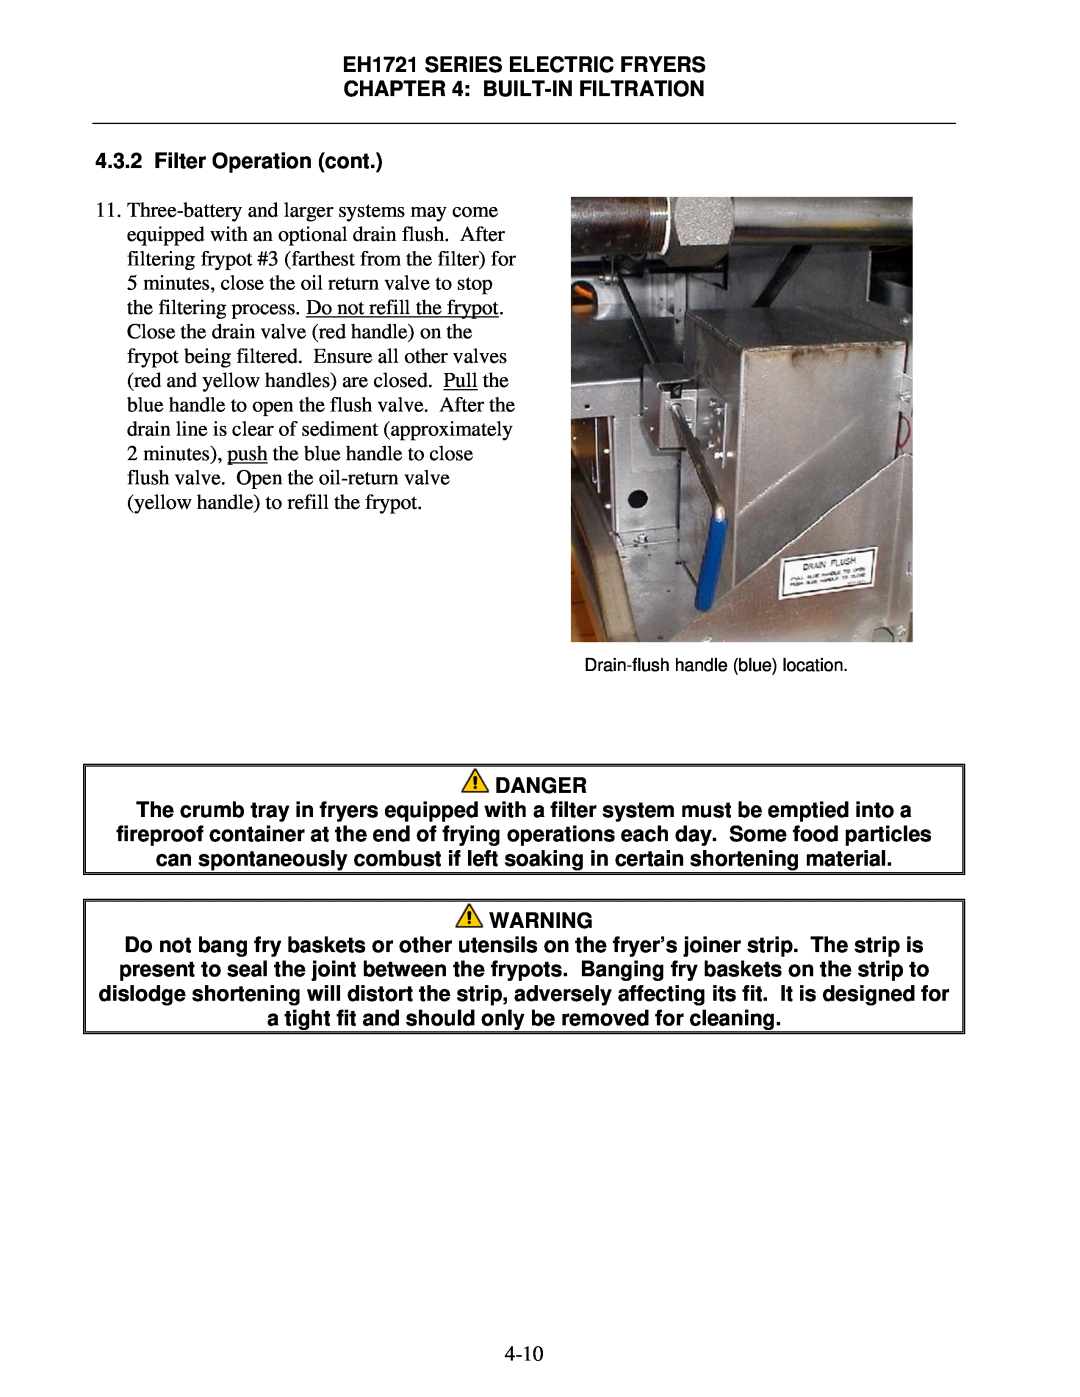 Frymaster operation manual EH1721 SERIES ELECTRIC FRYERS 